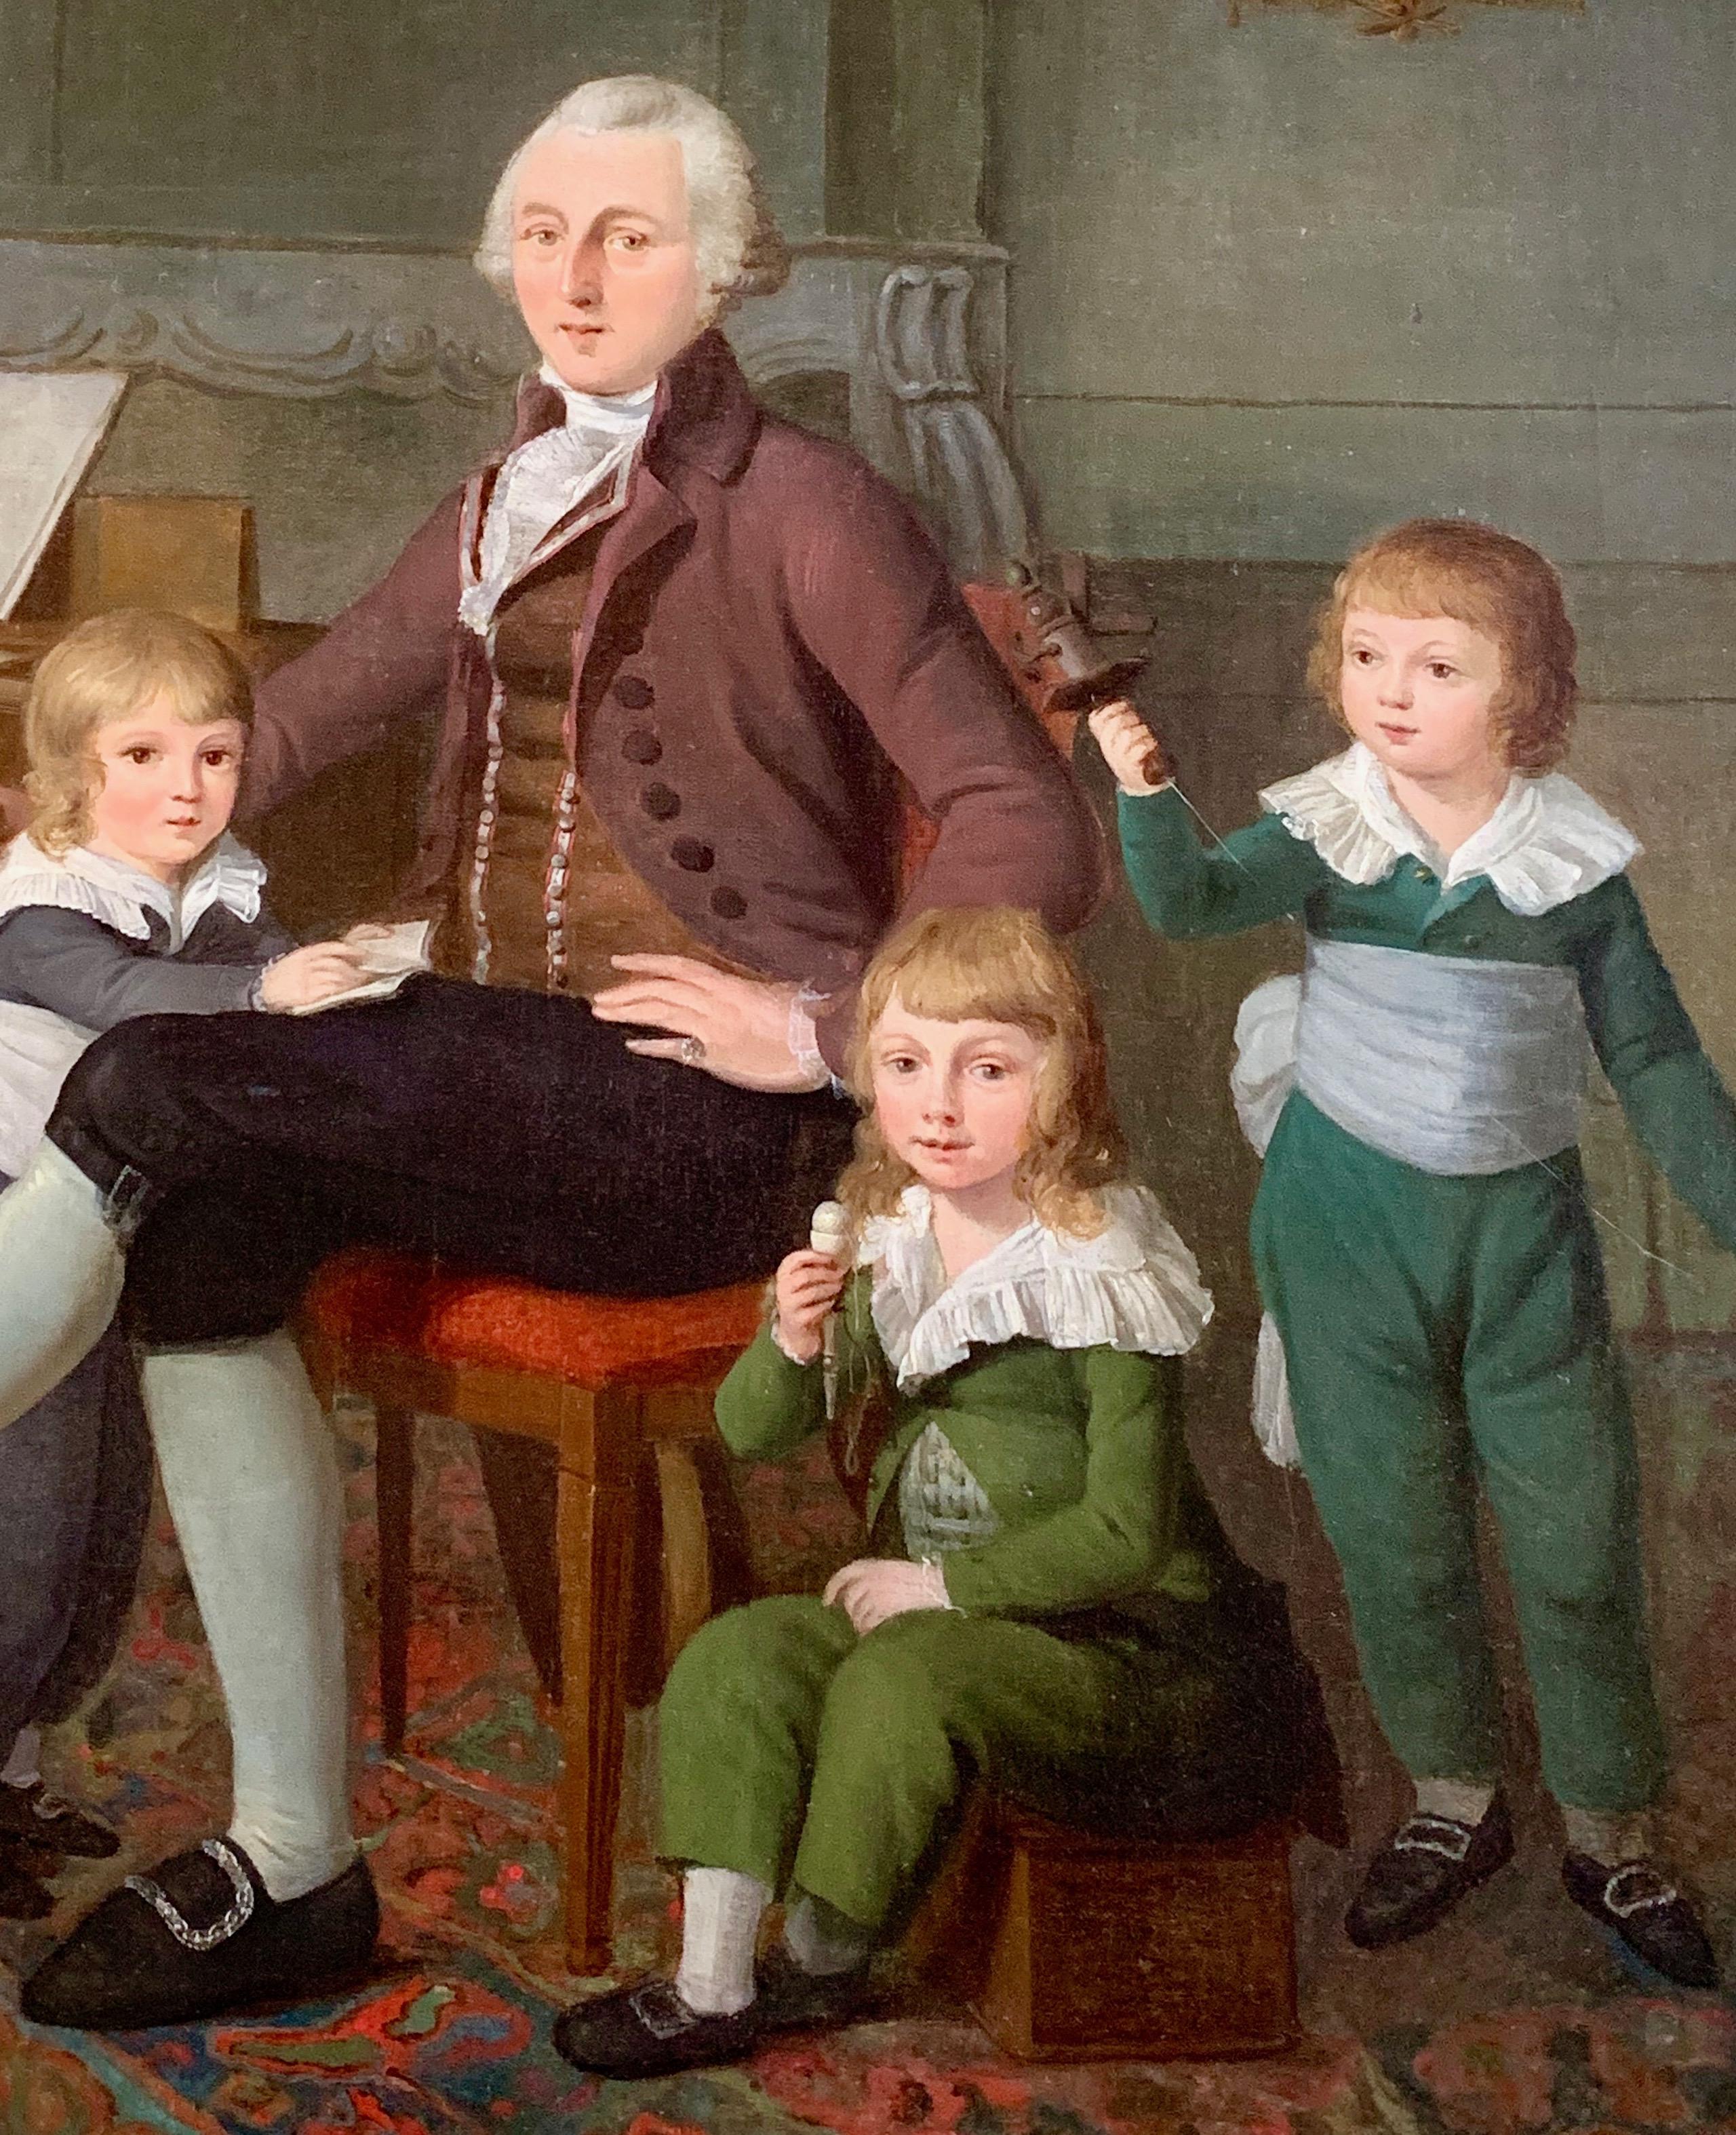 Period Portraits are thrilled to offer this this fine, rare and  highly detailed group portrait ‘The Music Room’ which depicts a handsome, yet beguilingly staged, domestic interior of a prosperous family around the year 1785.

This painting is